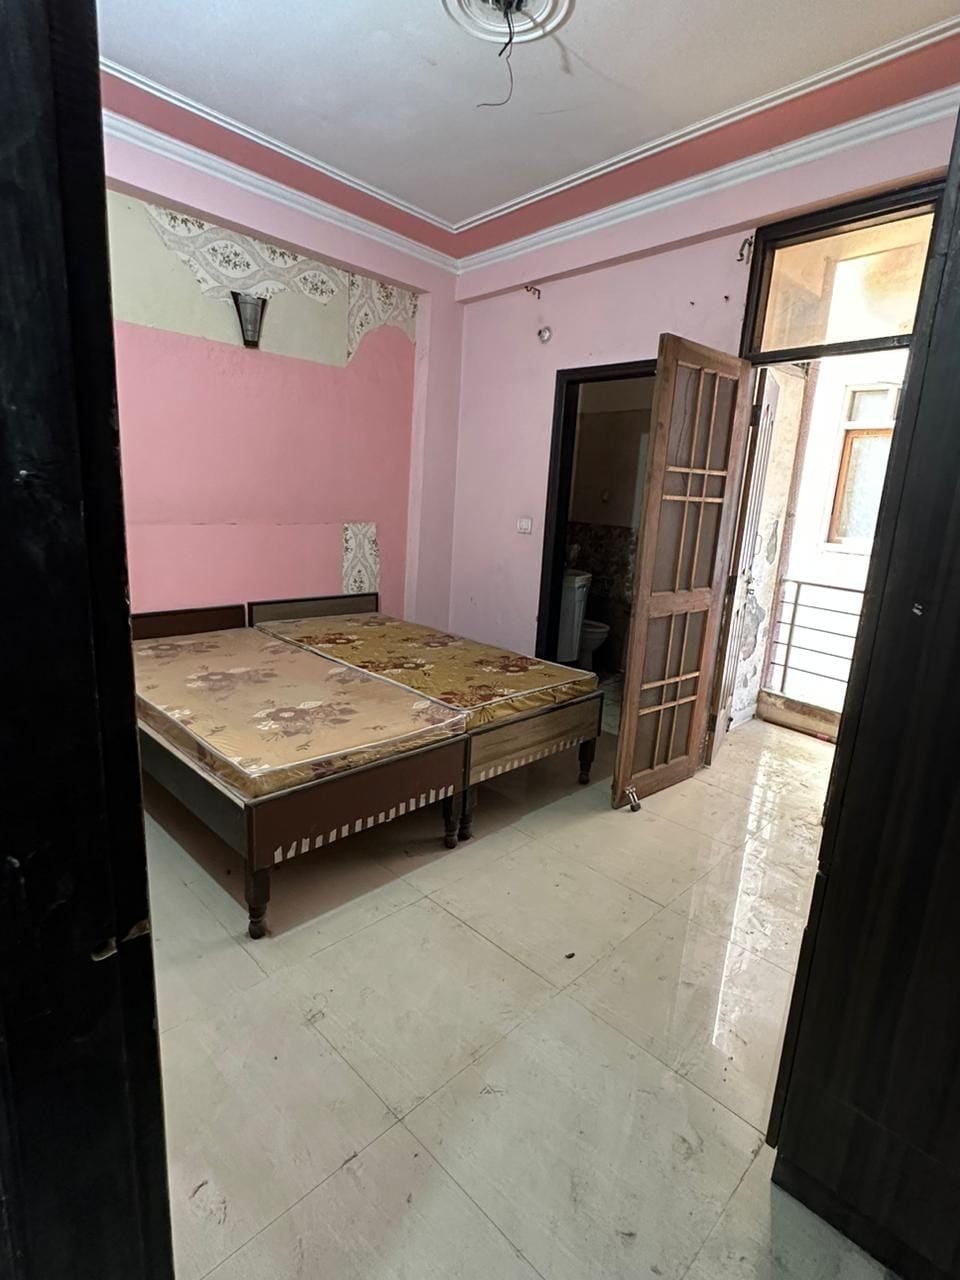 3 Bed/ 3 Bath Rent House/ Bungalow/ Villa, Furnished for rent @sector 44 noida